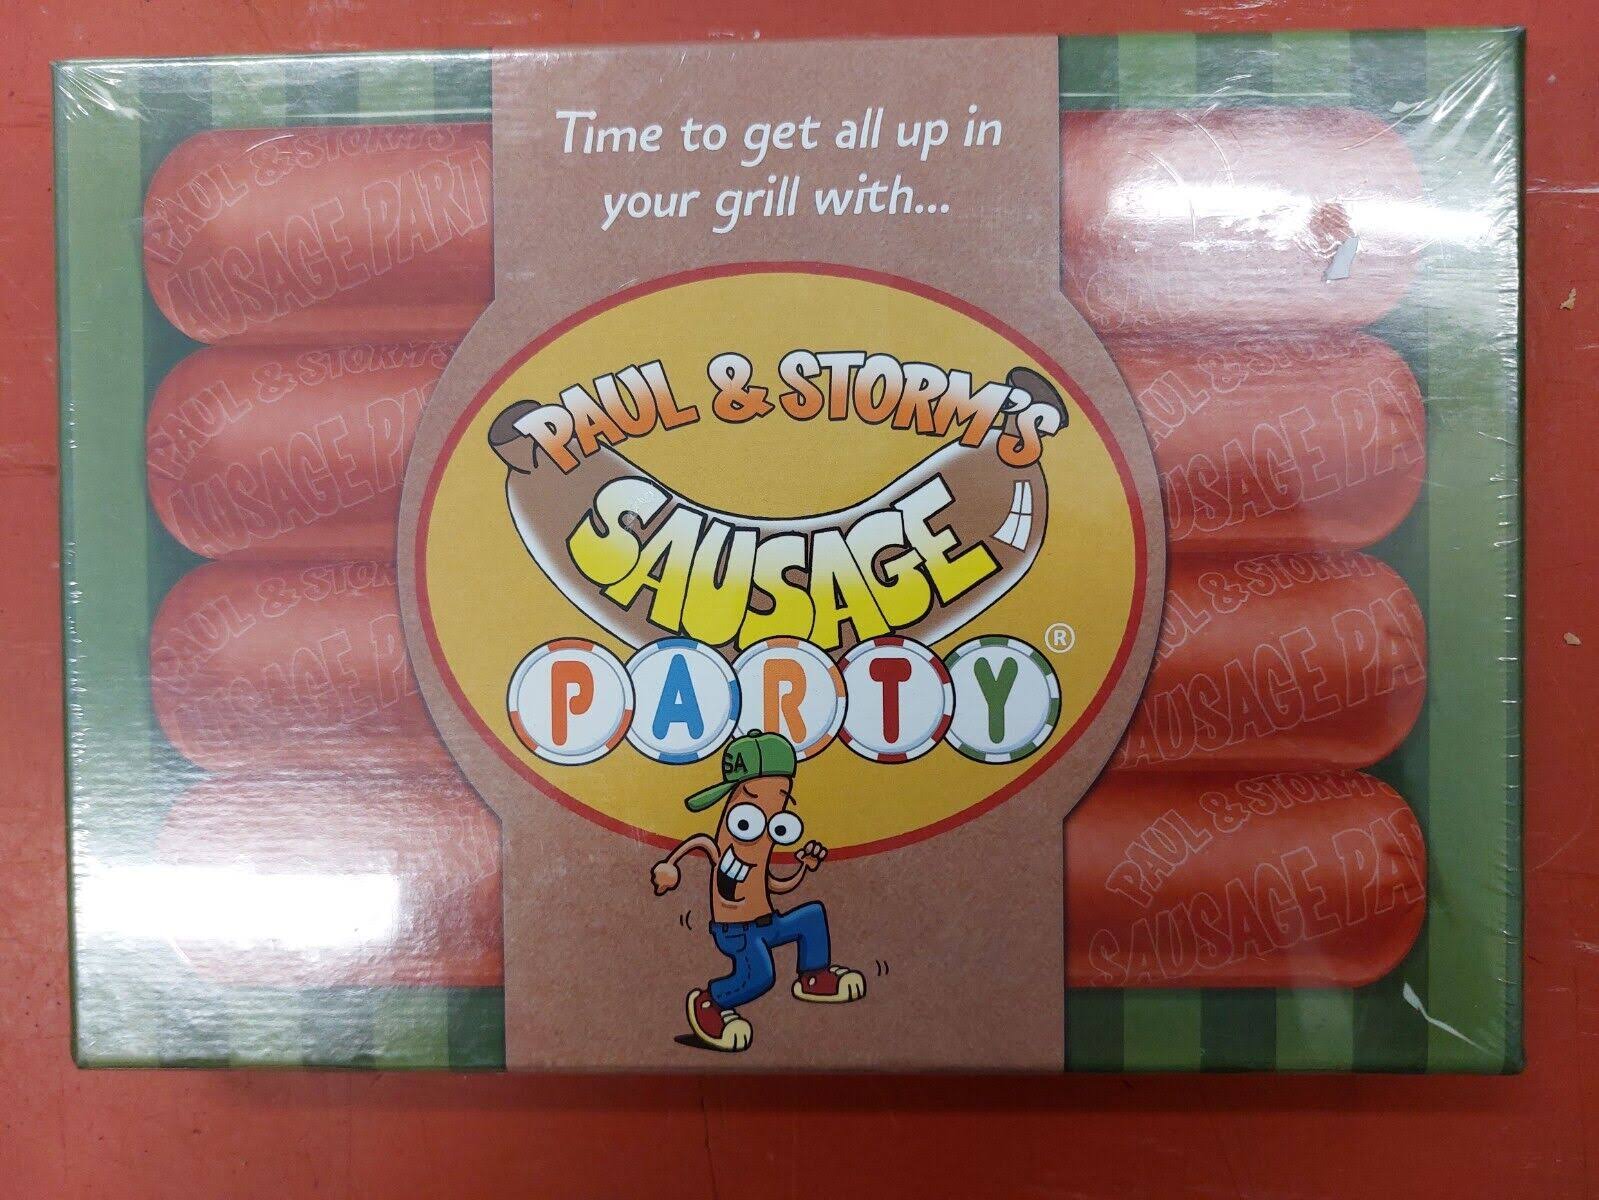 Paul & Storm's Sausage Party Game by Loneshark Games